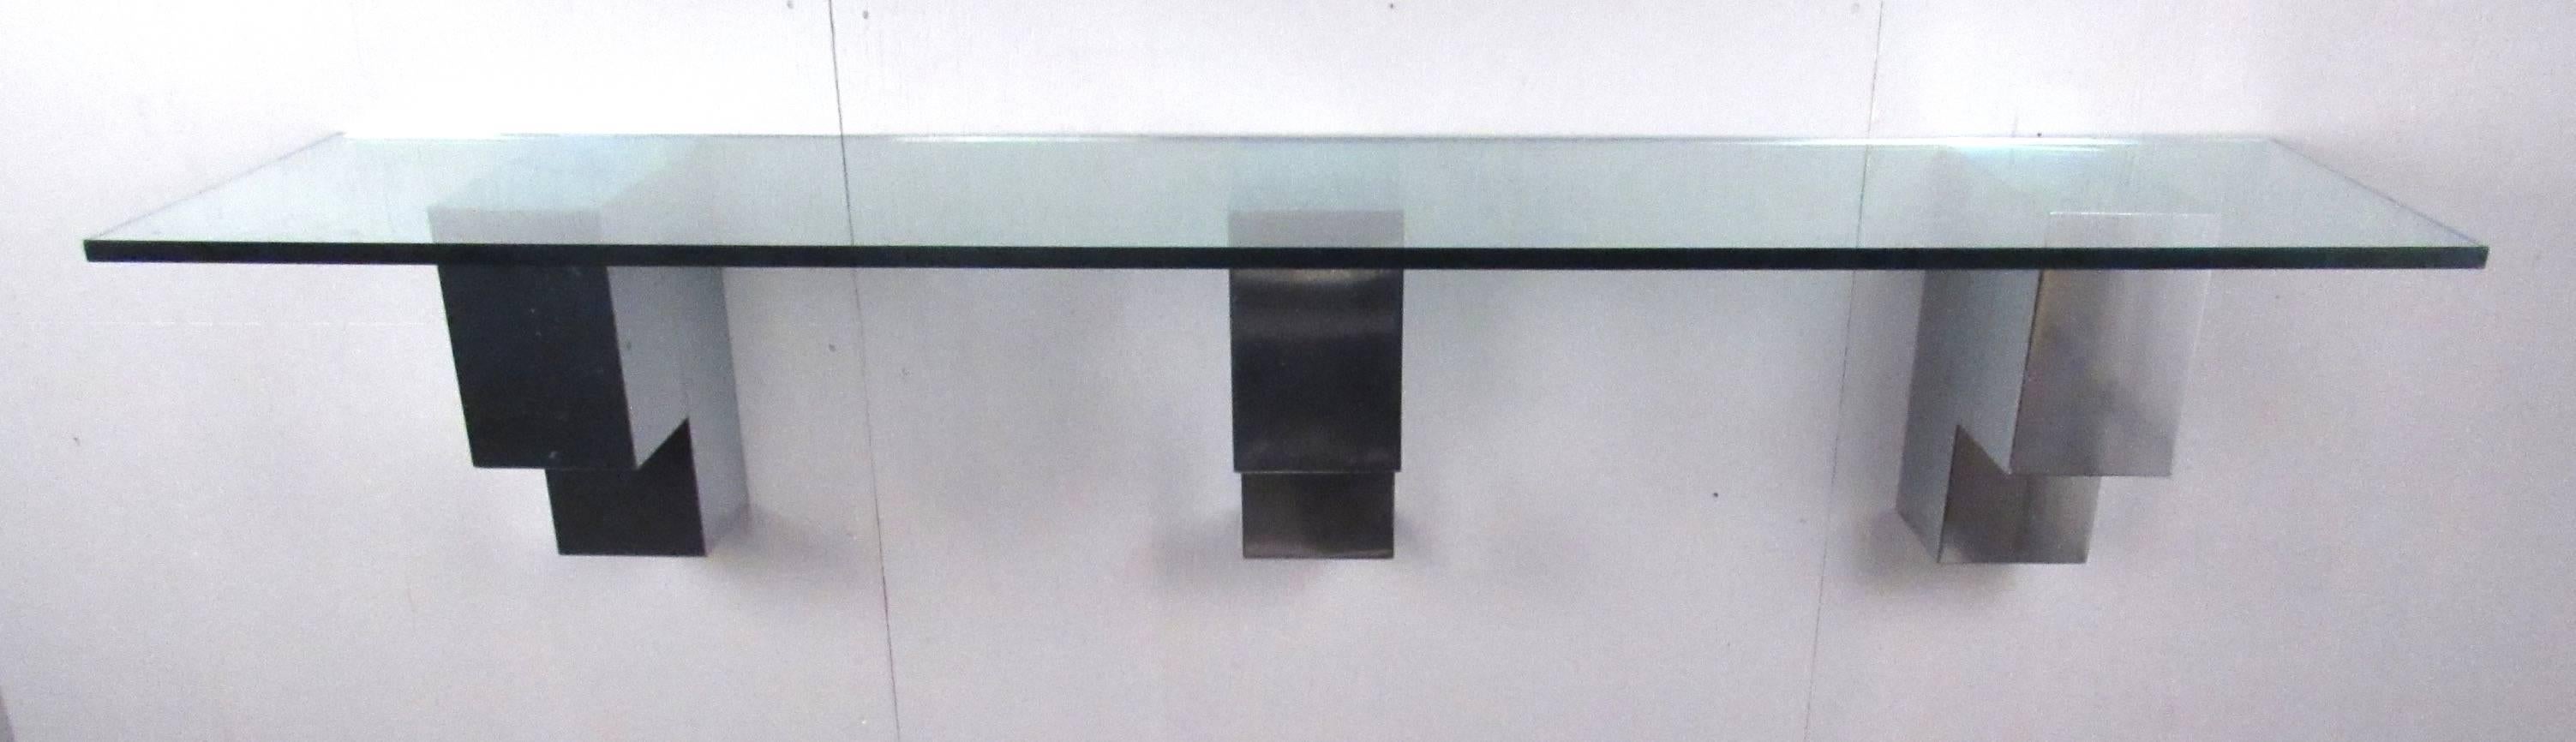 Modern style shelf featuring three chrome panelled wall mounted brackets supporting a 3/4